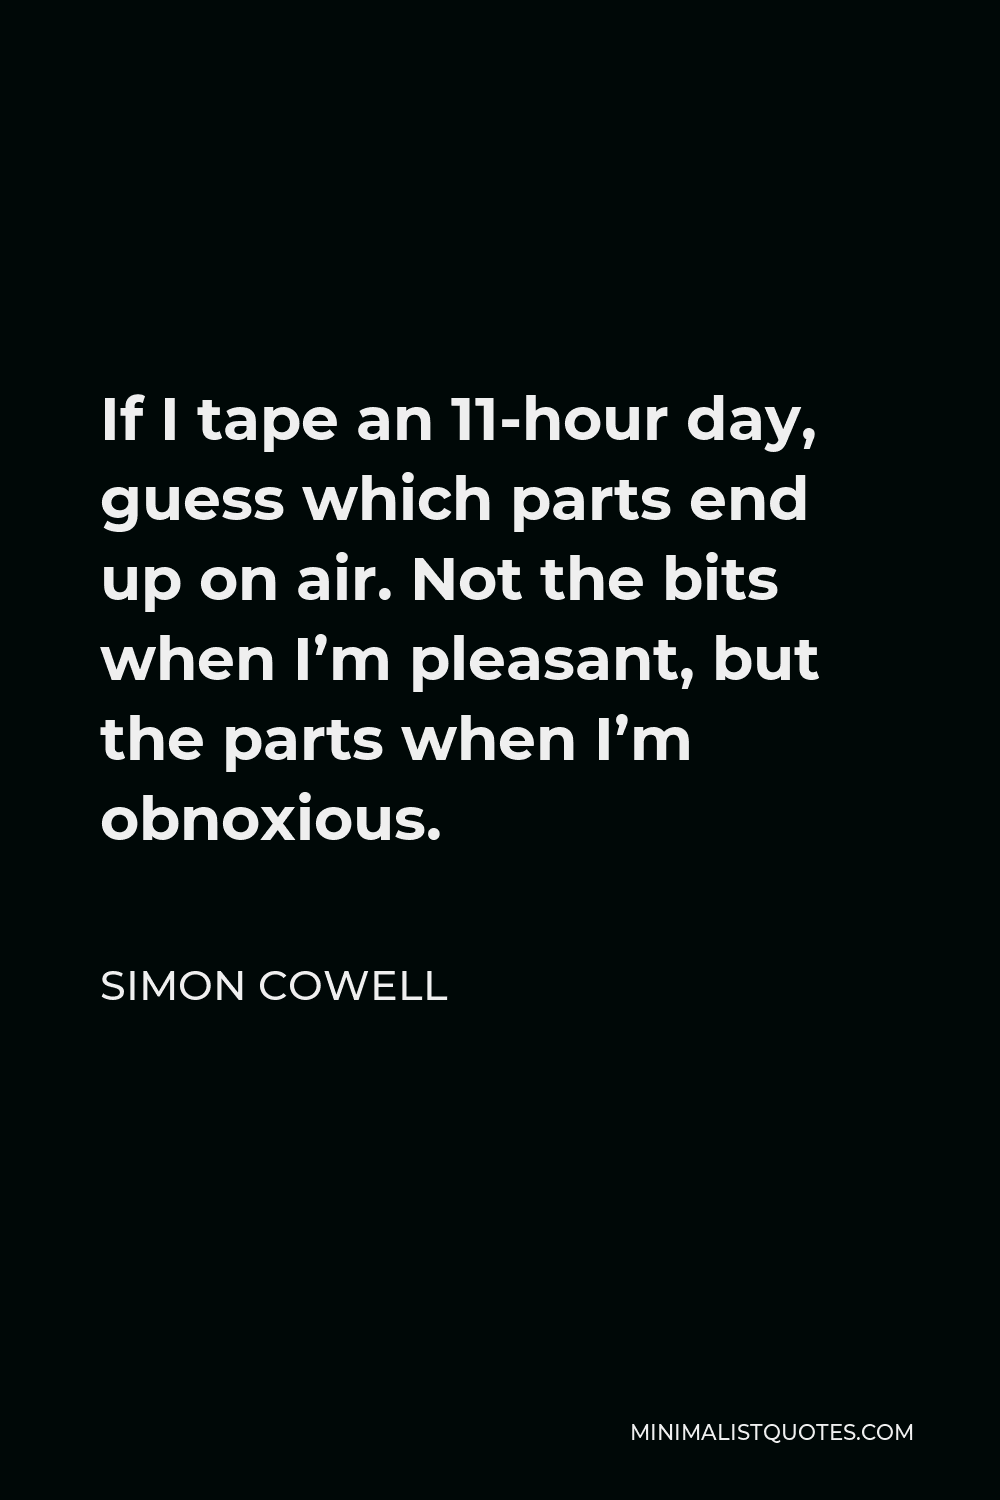 Simon Cowell Quote - If I tape an 11-hour day, guess which parts end up on air. Not the bits when I’m pleasant, but the parts when I’m obnoxious.